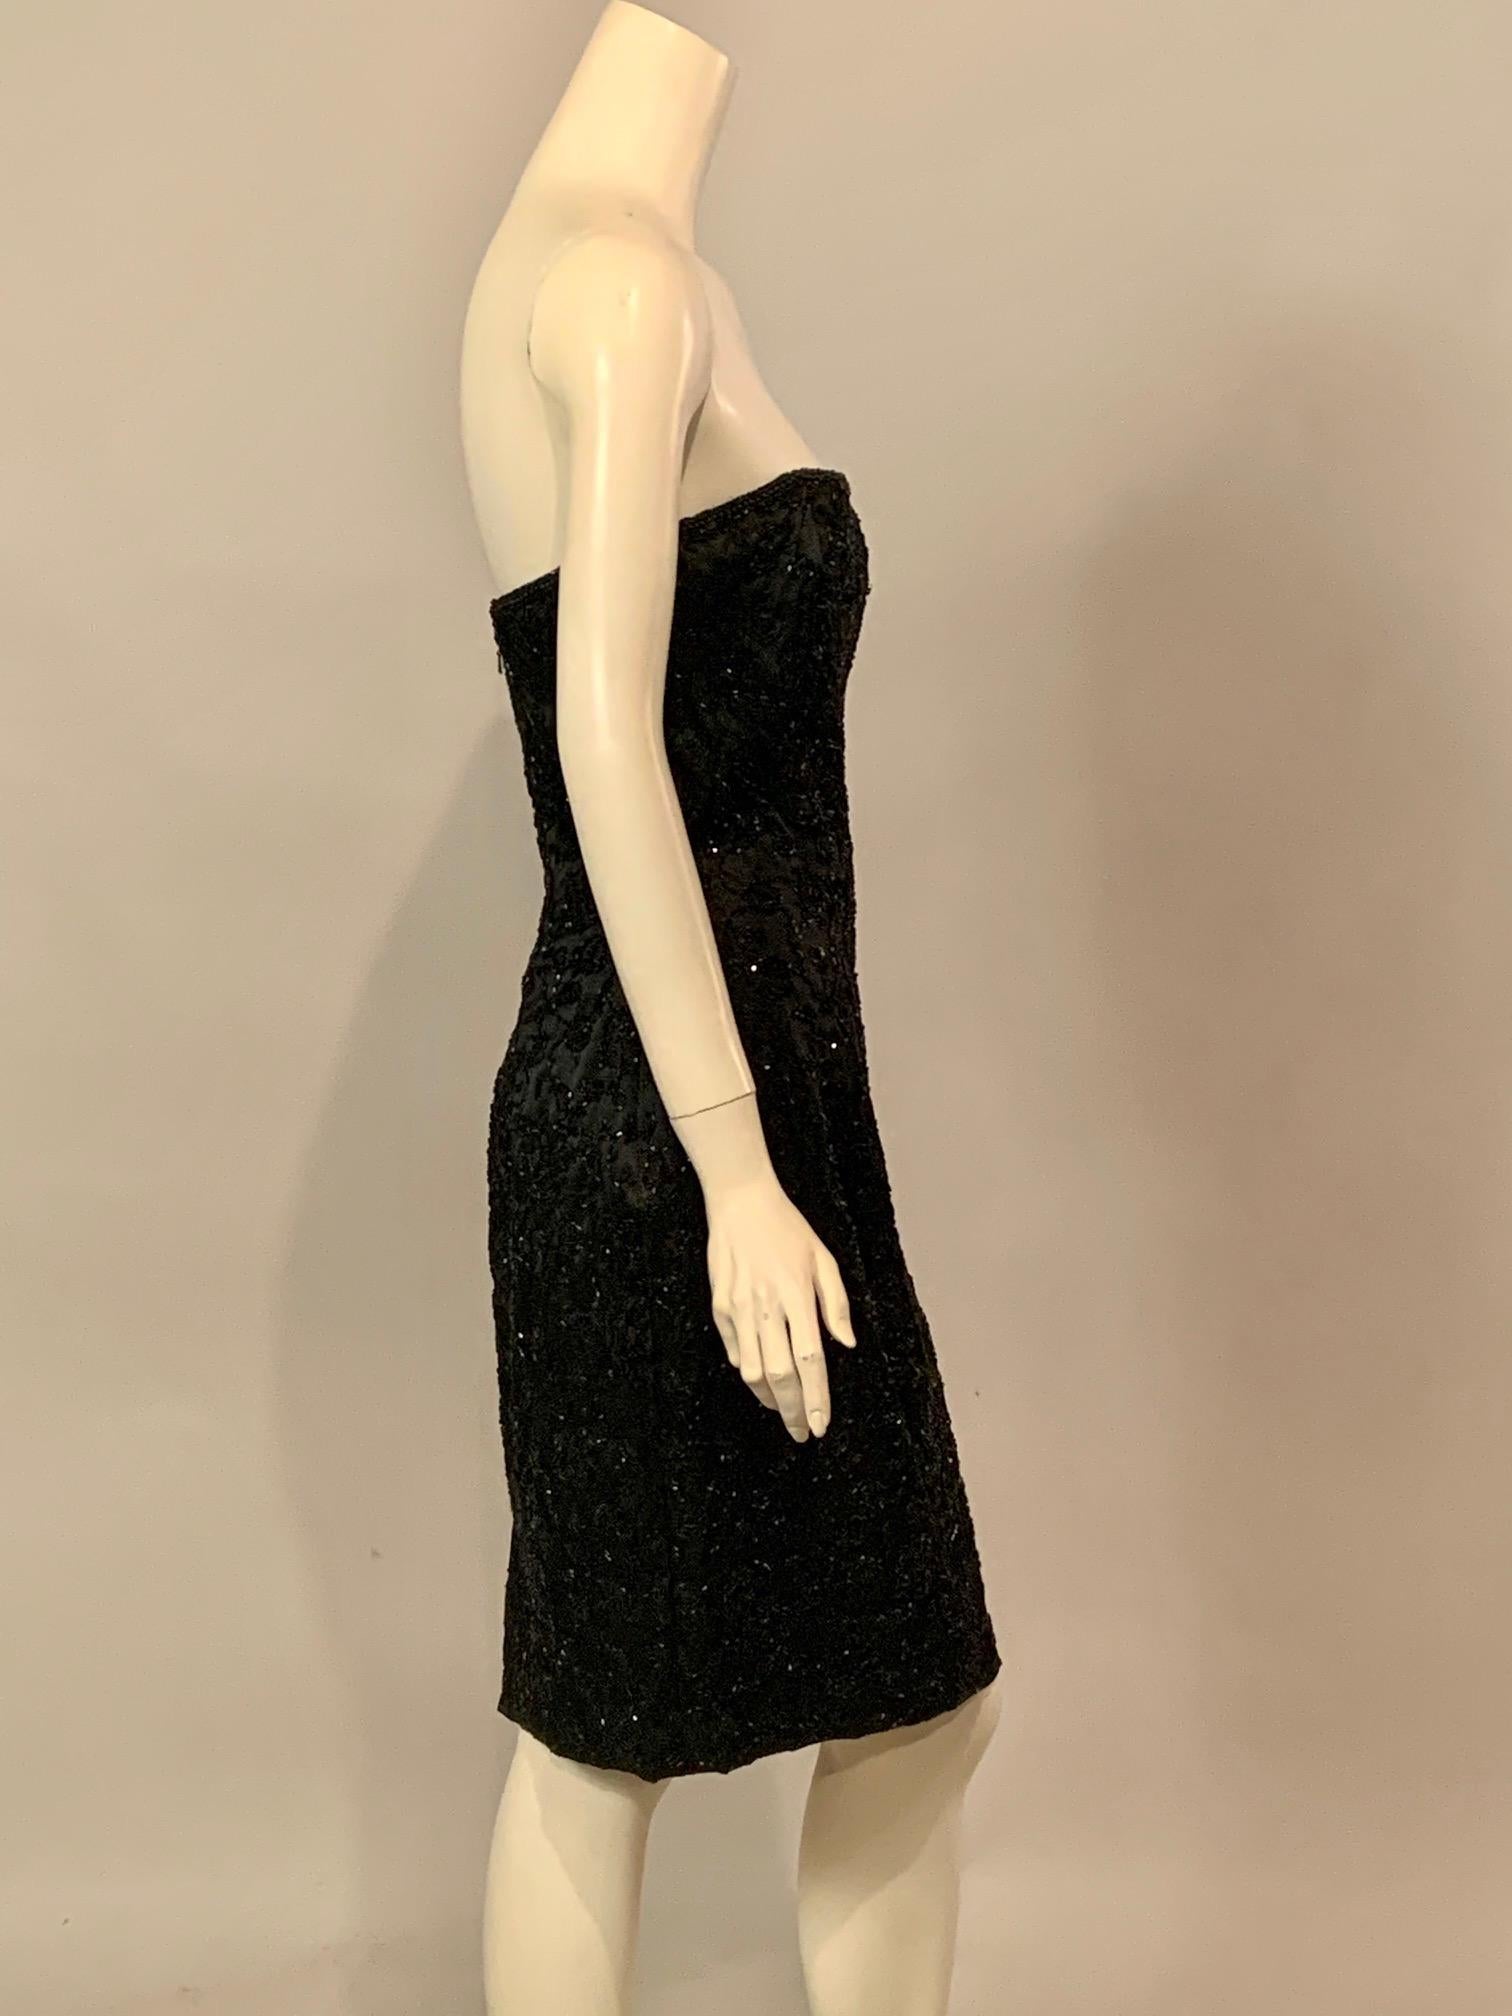 Elaborately Beaded Strapless Black Cocktail Dress and Jacket  circa 1950 For Sale 1